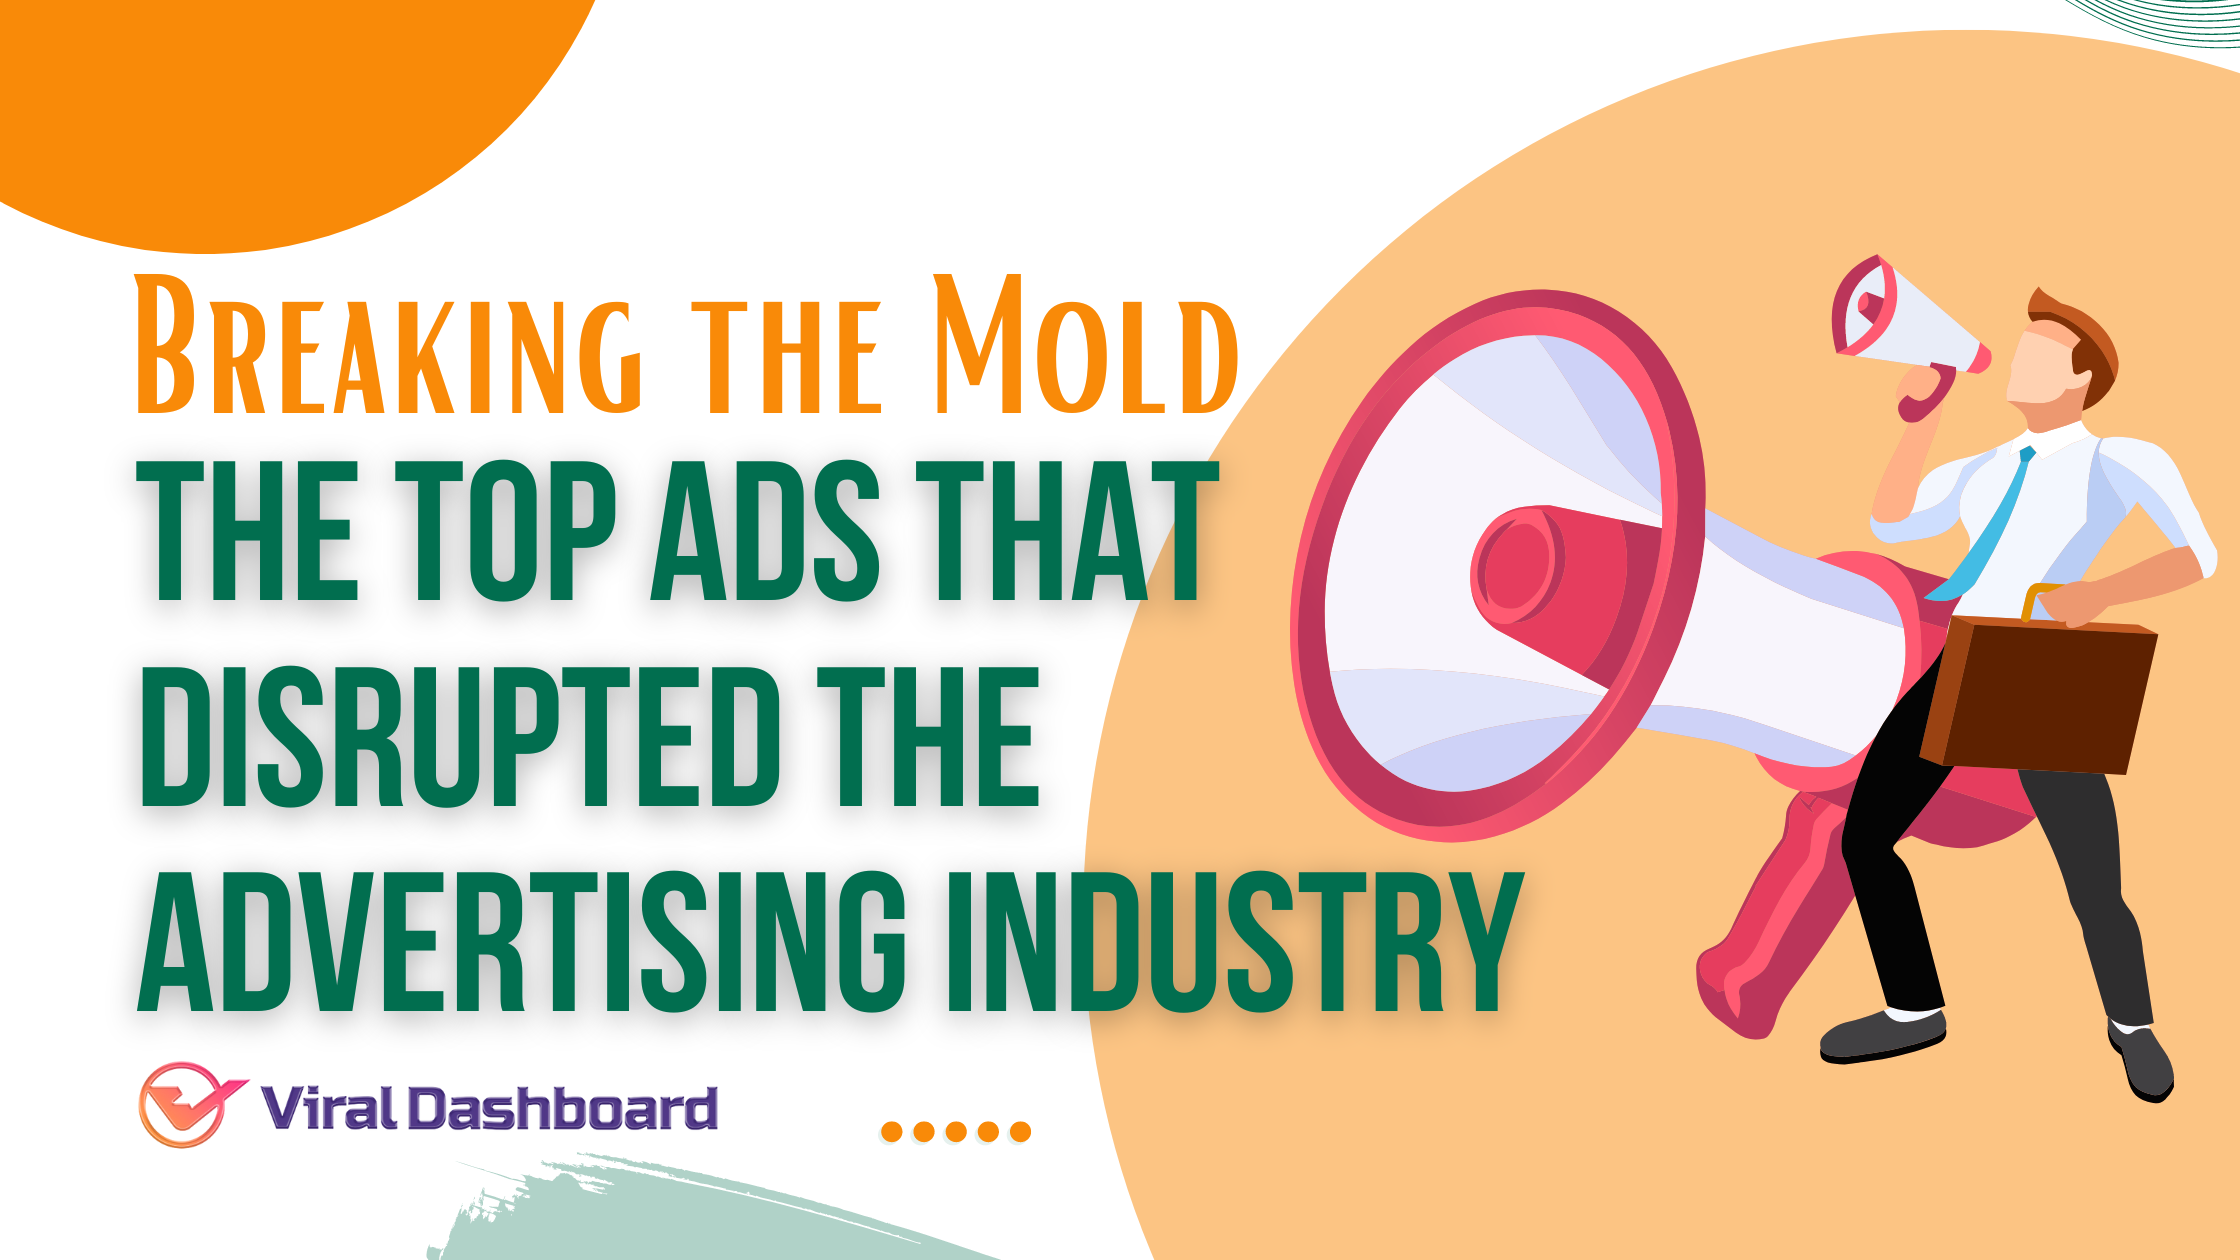 Breaking the Mold: The Top Ads That Disrupted the Advertising Industry